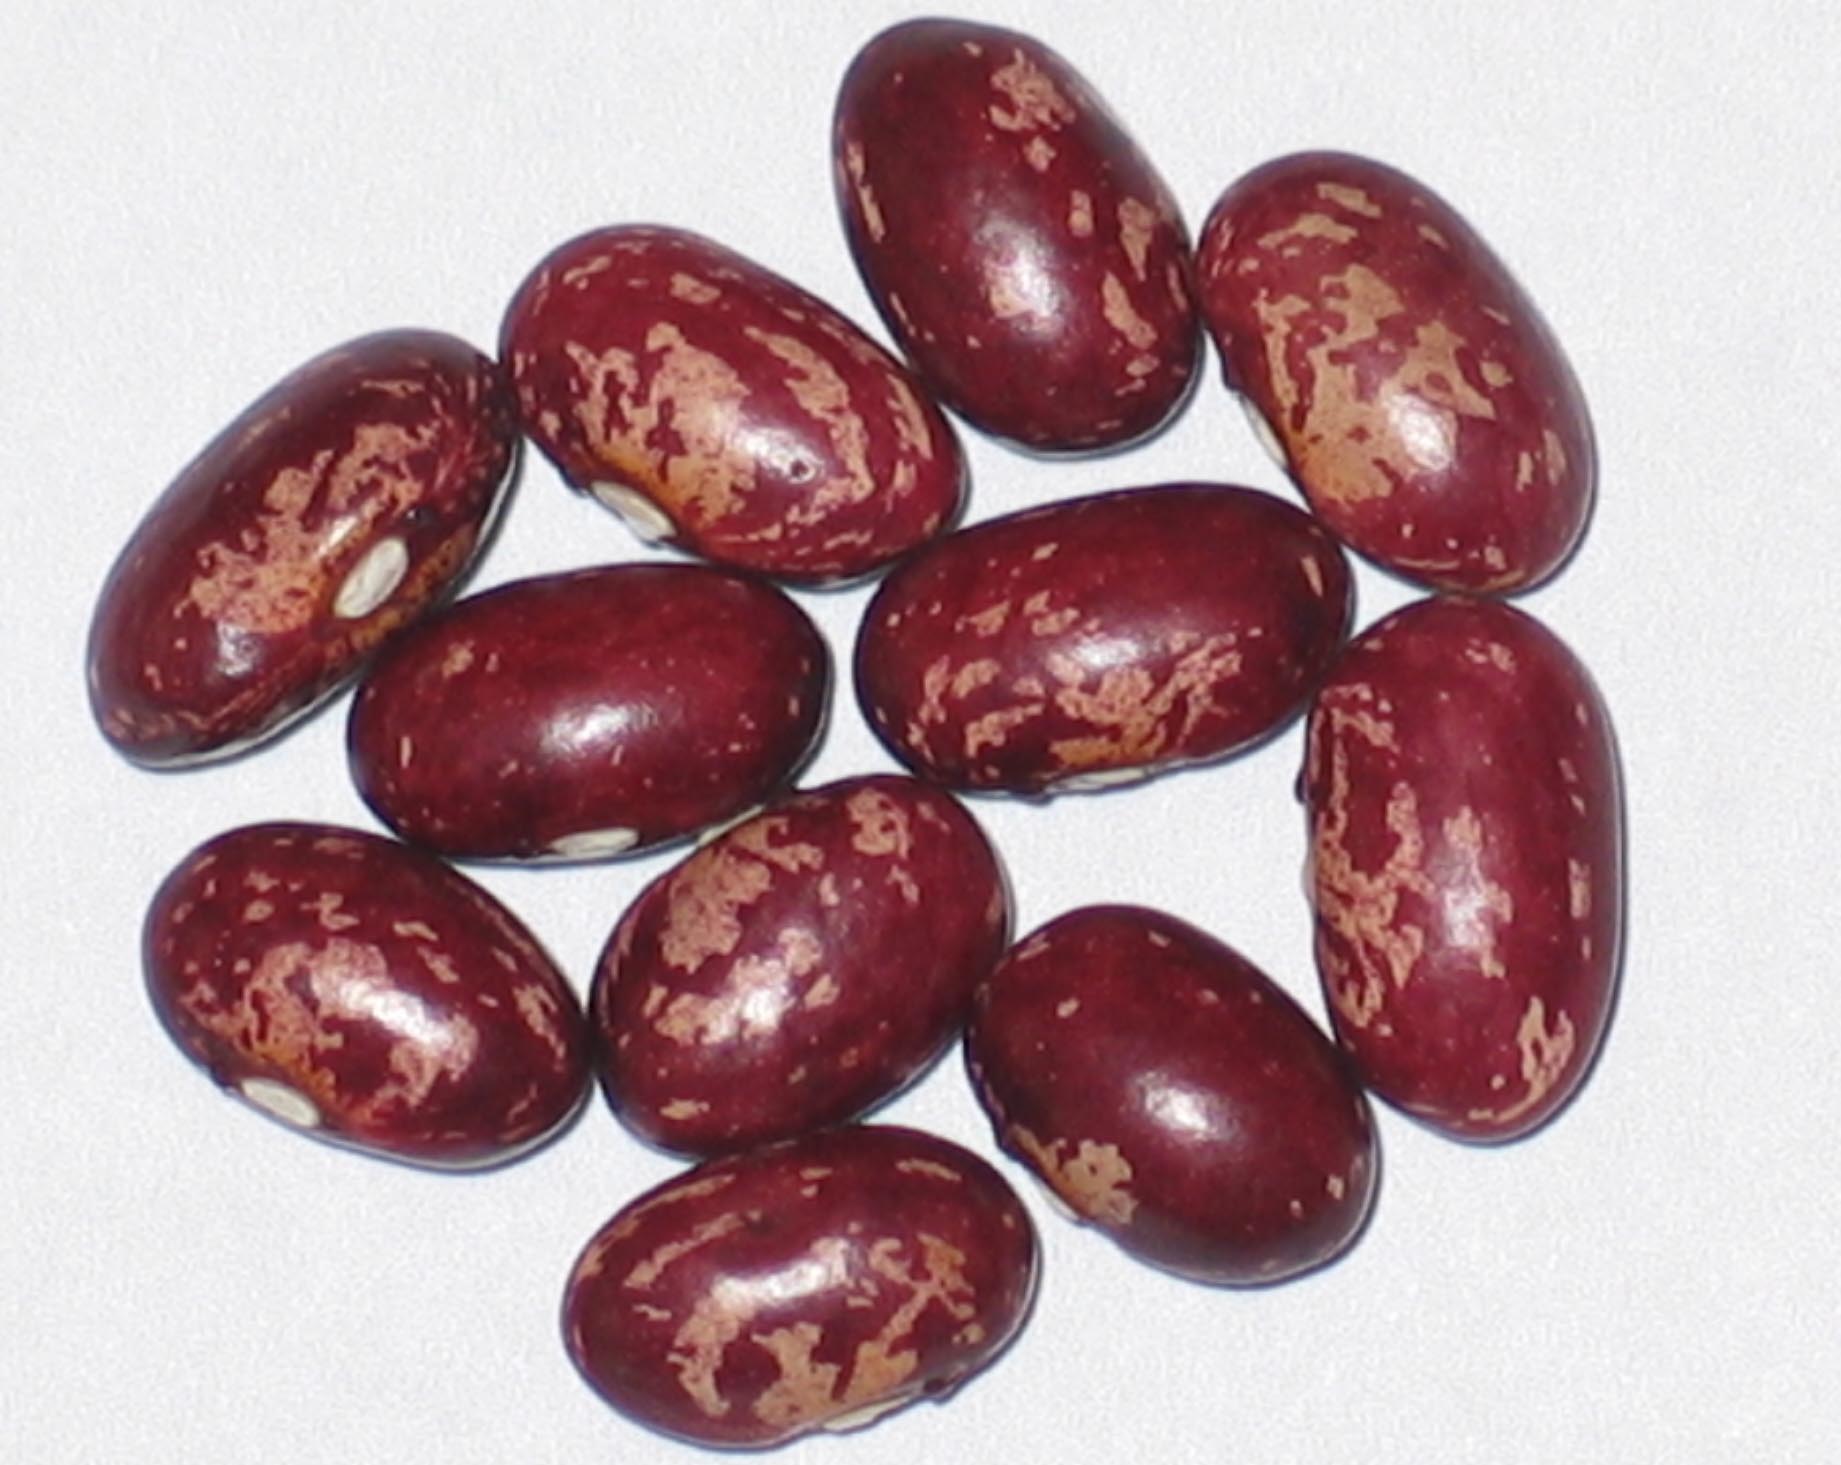 image of Early Warwick beans